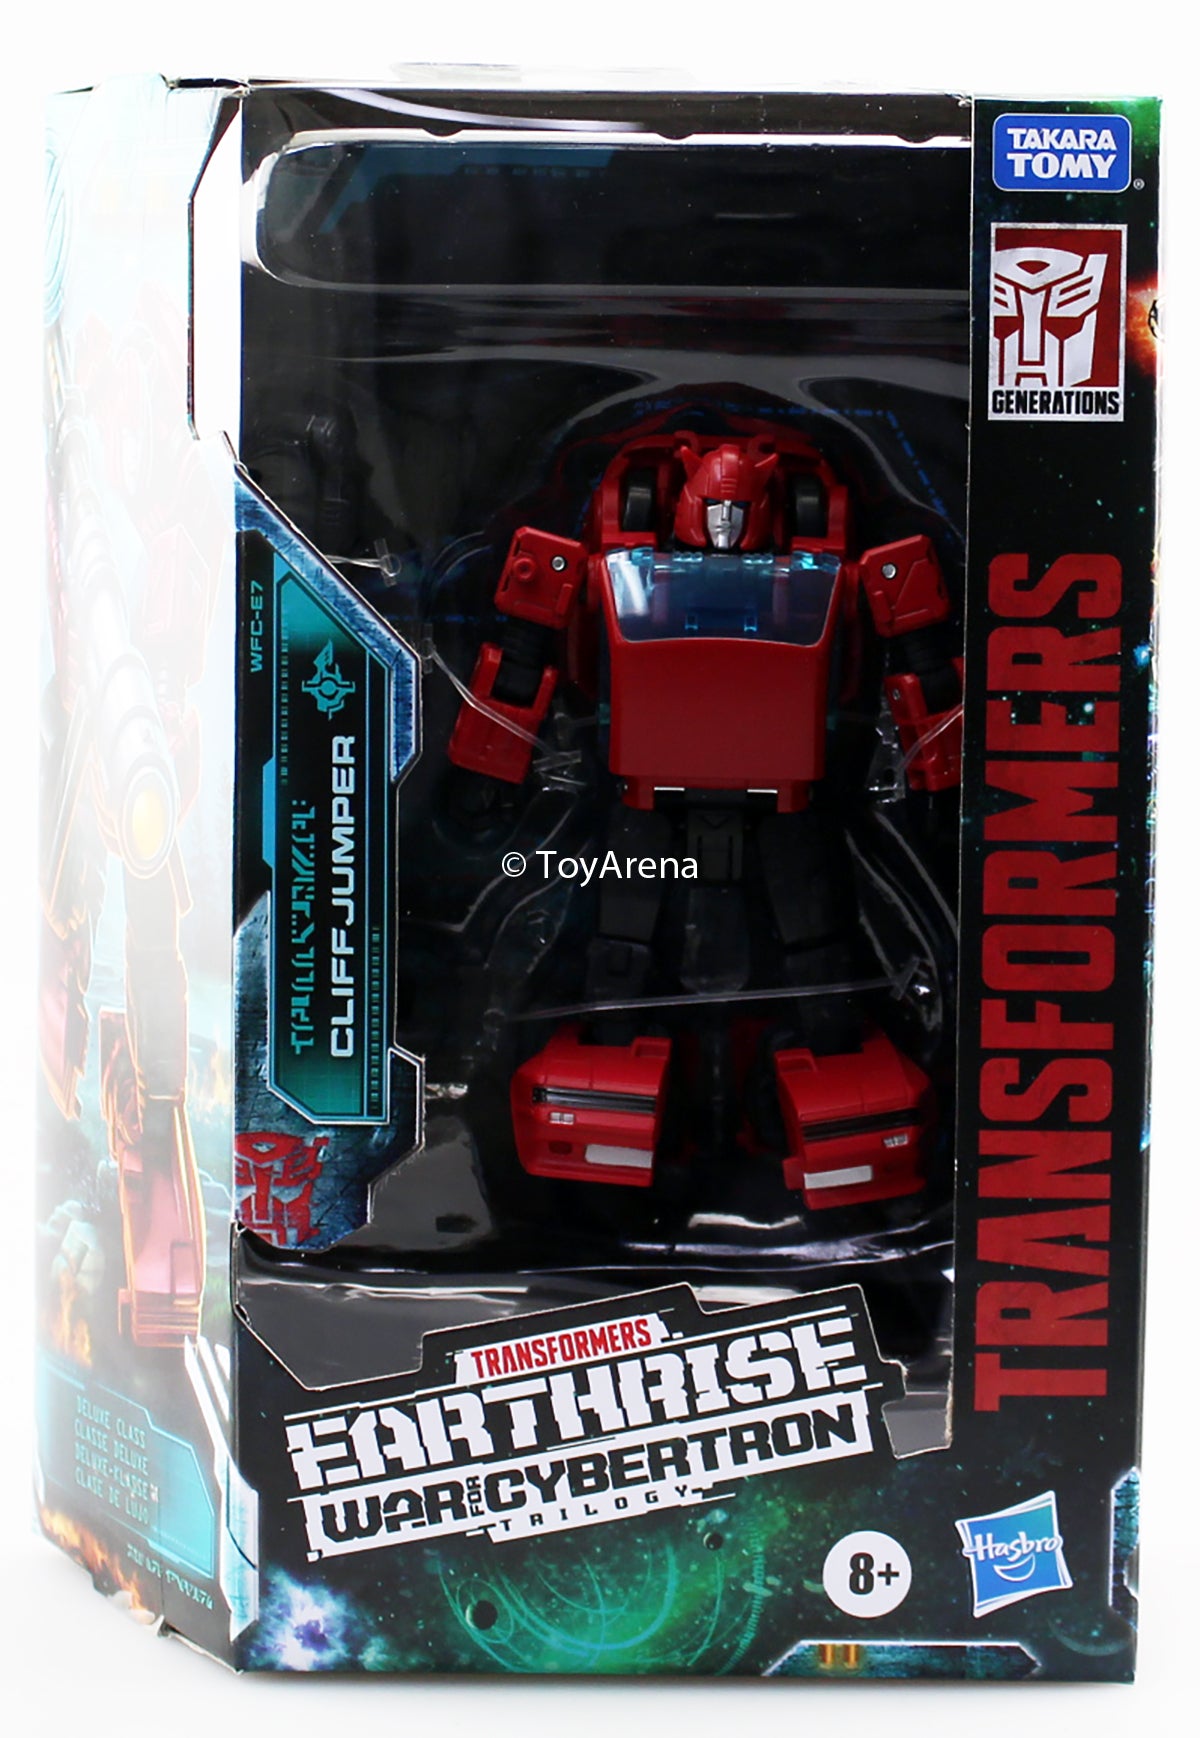 Hasbro Transformers War for Cybertron Earthrise Deluxe Cliffjumper Action Figure